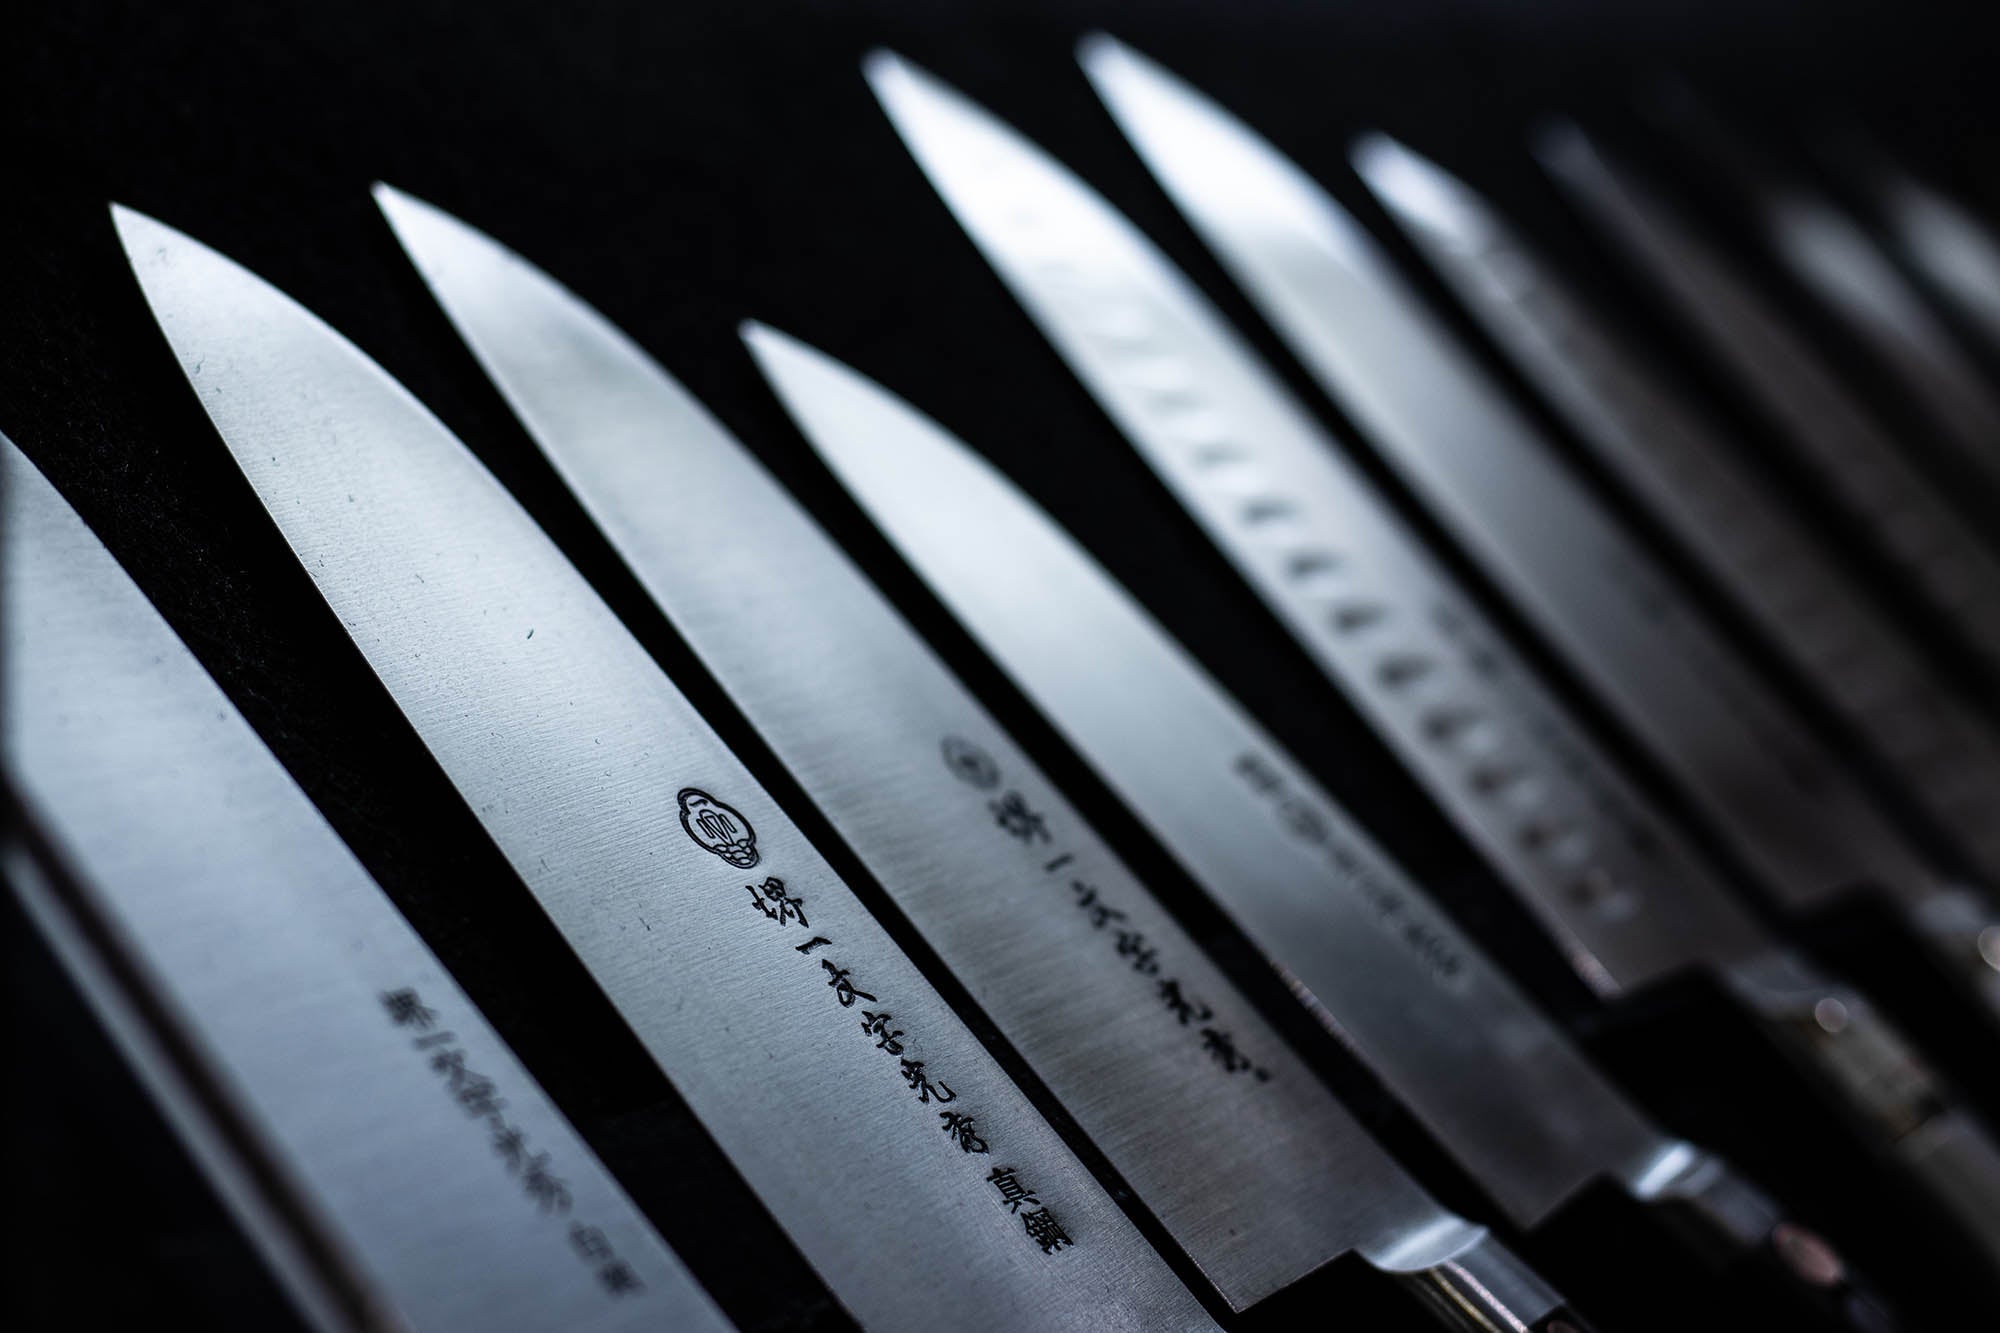 Precision Cutting with Japanese Knife Set